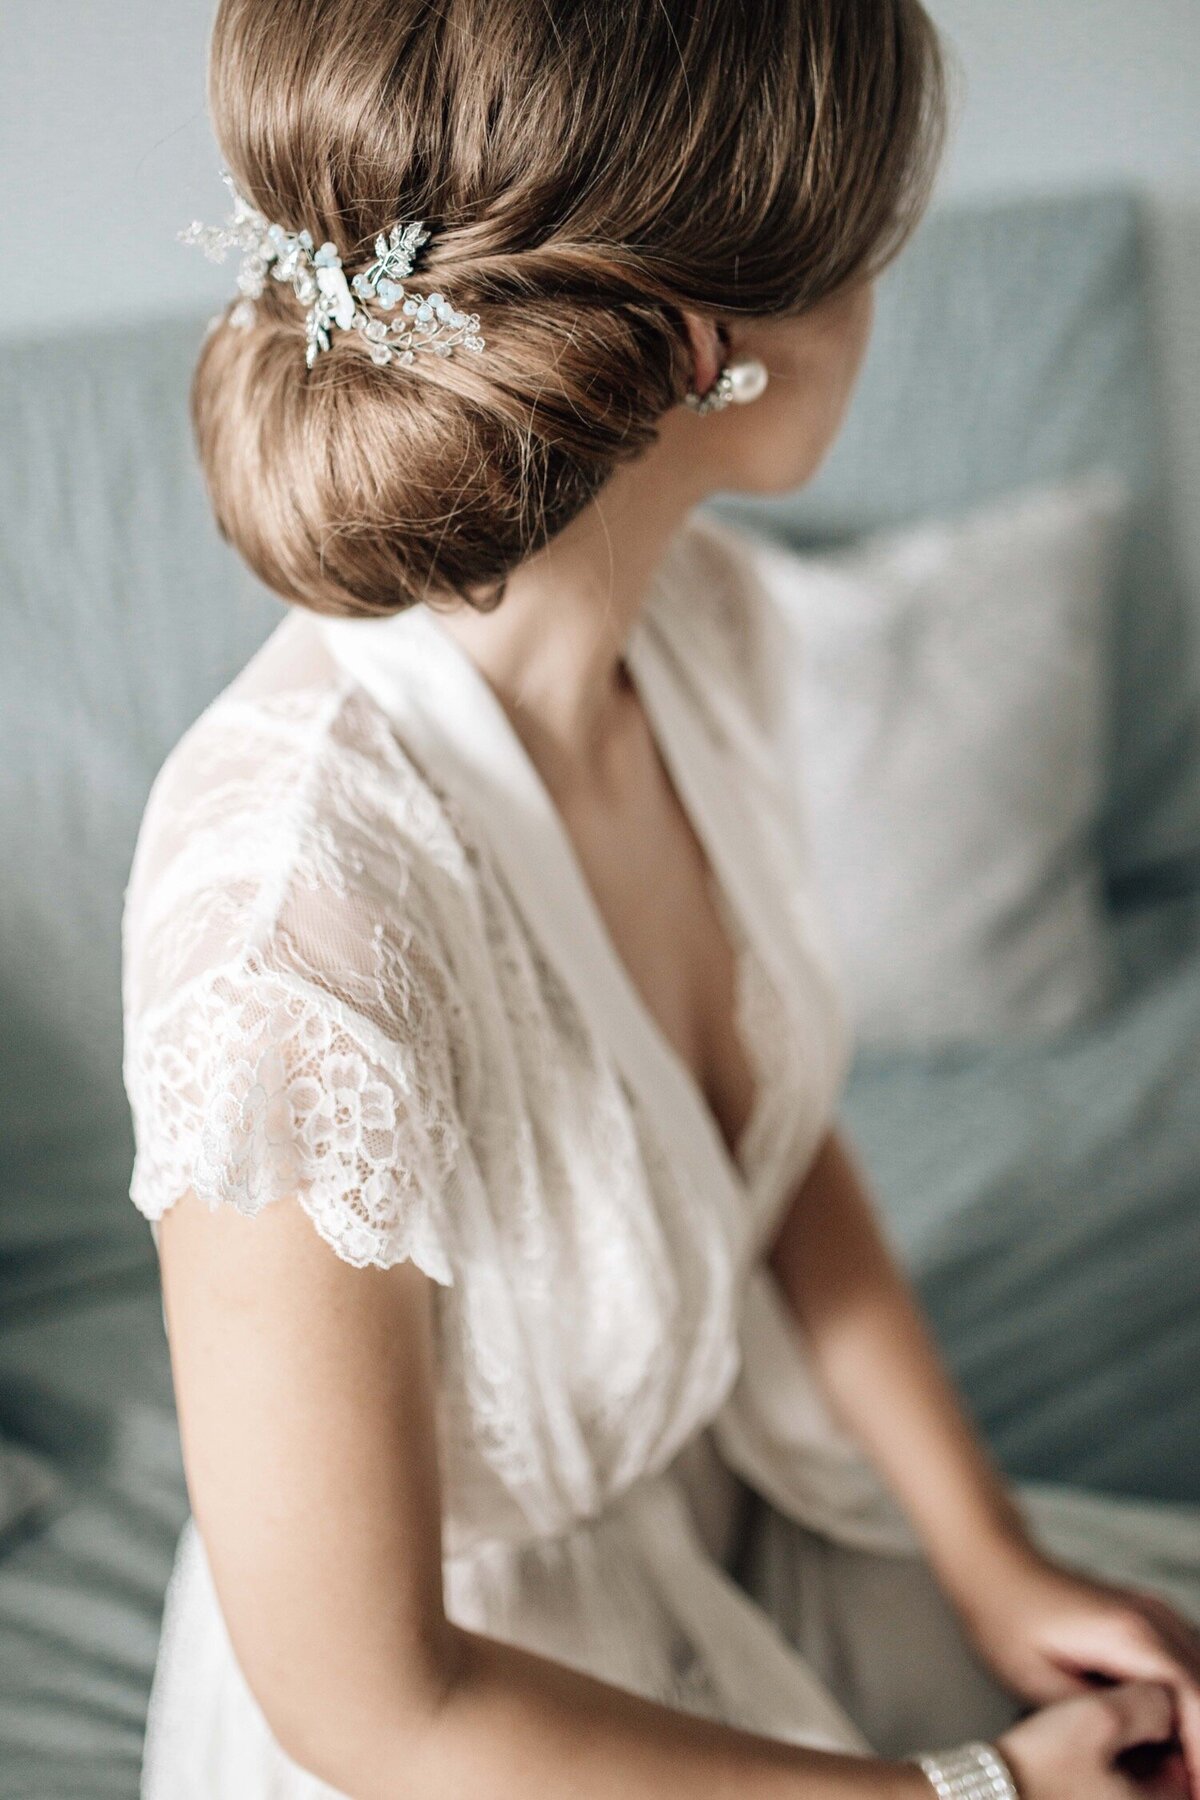 008_Flora_And_Grace_Europe_Fine_Art_Wedding_Photographer-15_A sophisticated fine art wedding in Europe with an editorial edge captured by Vogue wedding photographer Flora and Grace.